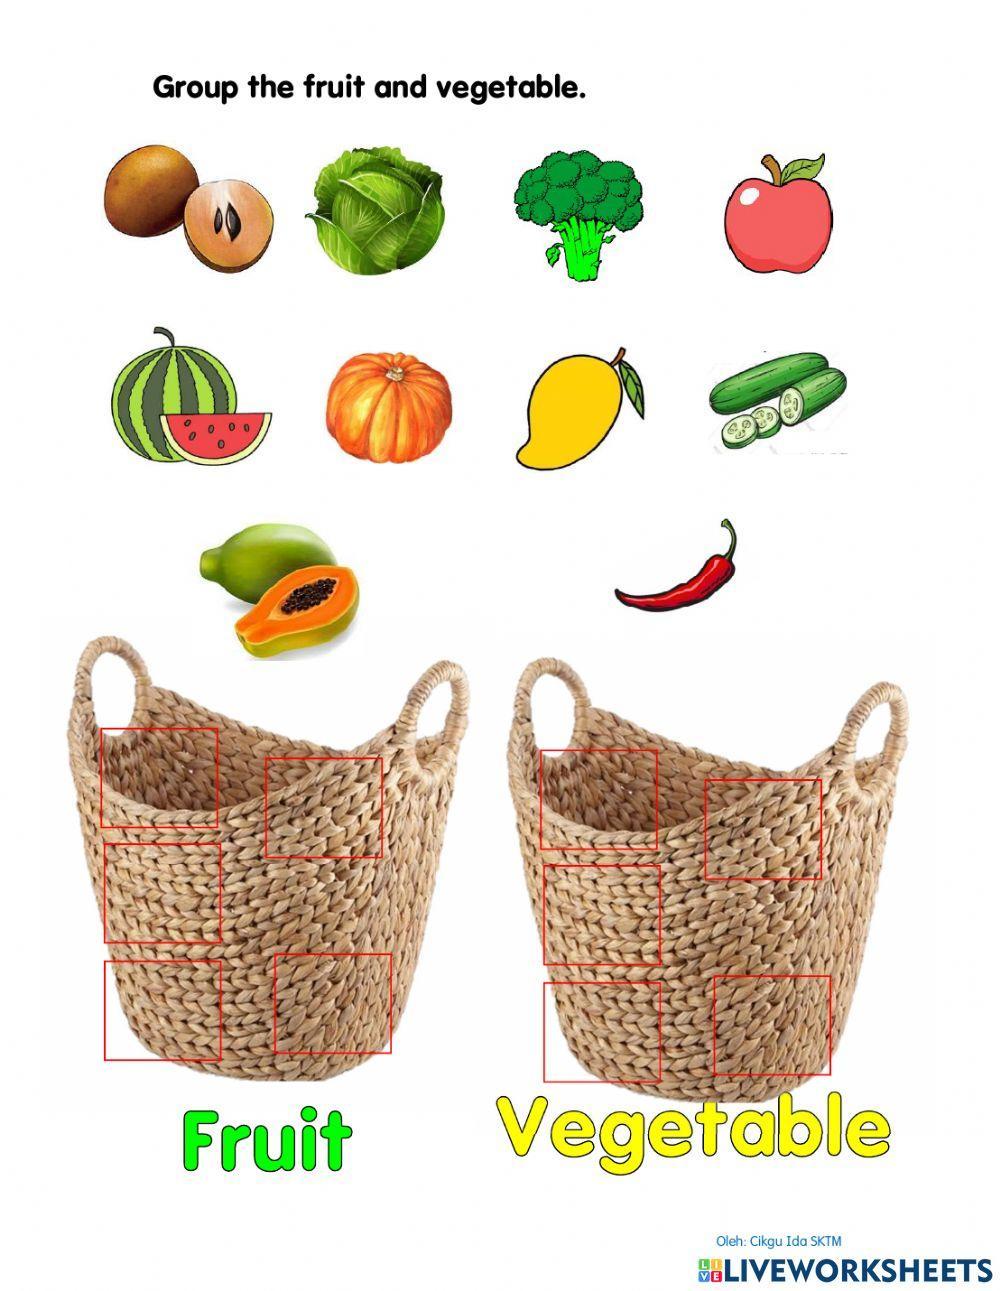 Grouping Vegitables and Fruits